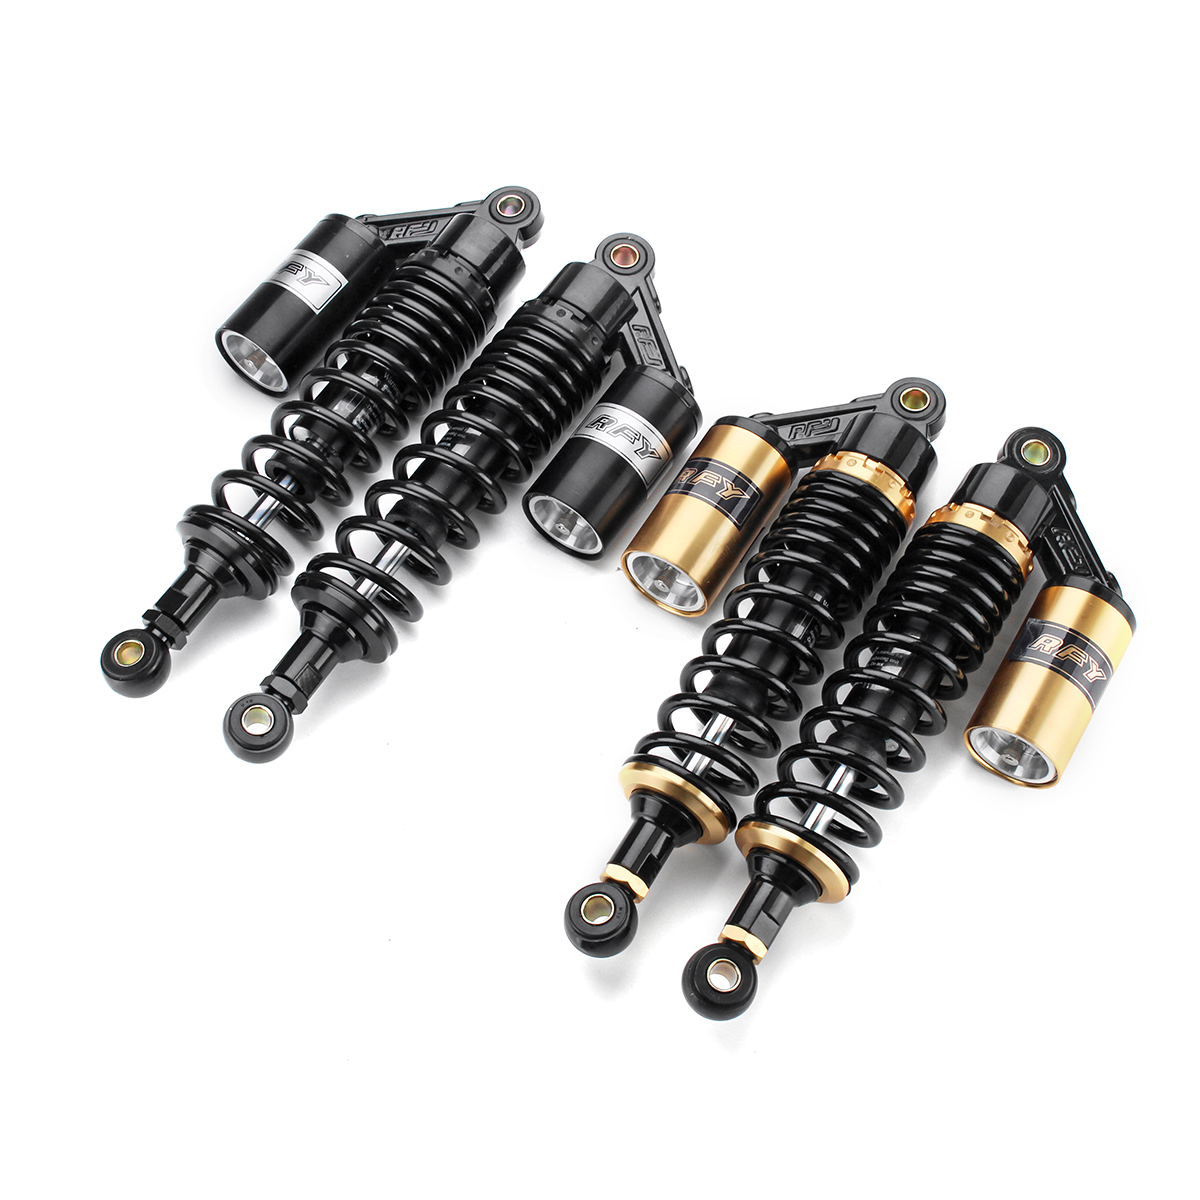 400mm-1574inch-Rear-Air-Shock-Absorbers-Suspension-For-ATV-Motorcycle-Dirt-Bike-1407373